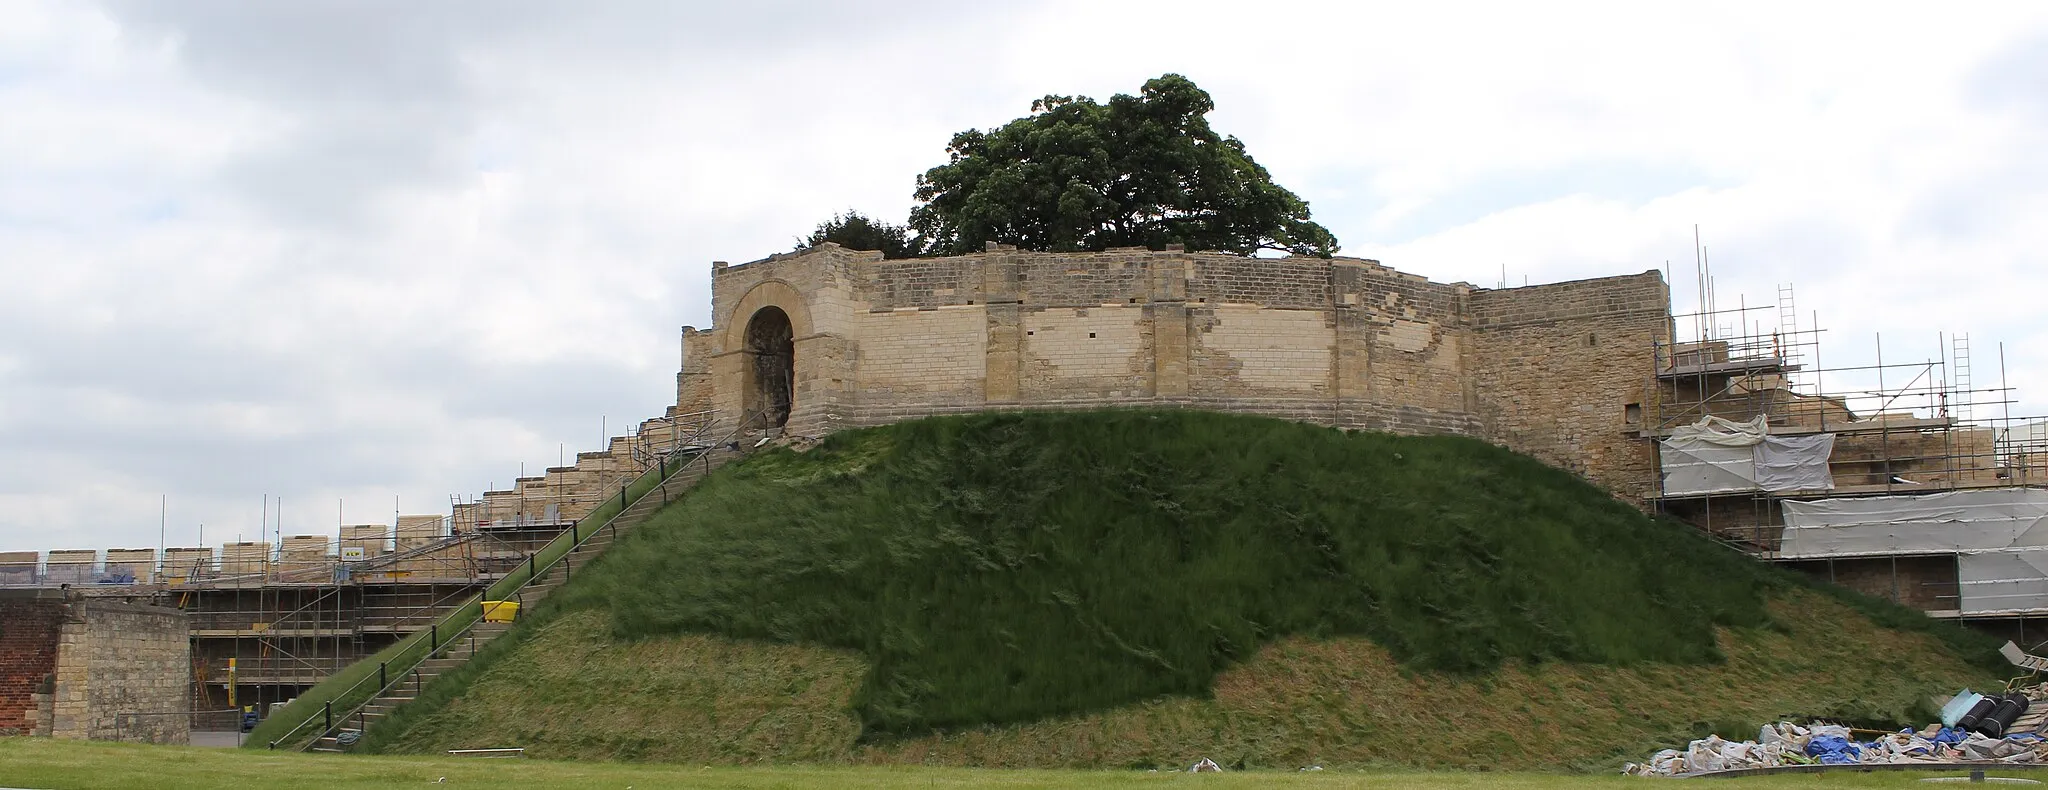 Photo showing: The 12th-century Lucy Tower at Lincoln Castle